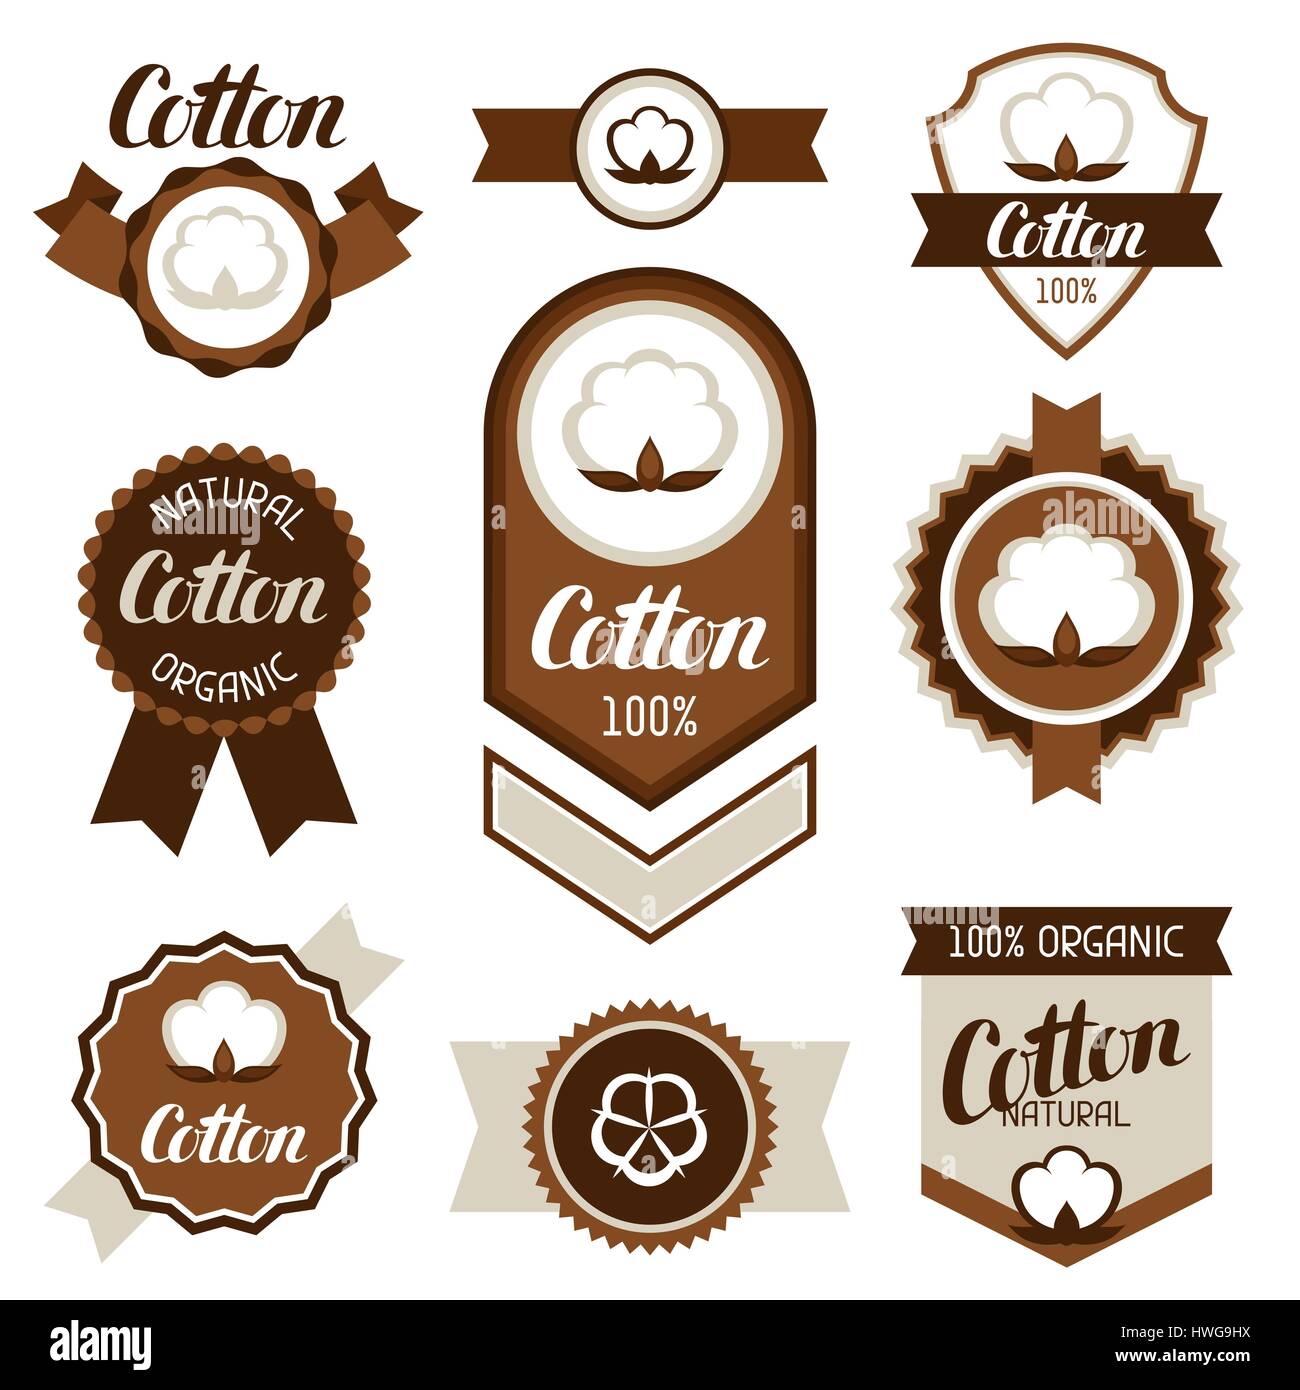 Cotton badges, banners and emblems. Clothing labels Stock Vector